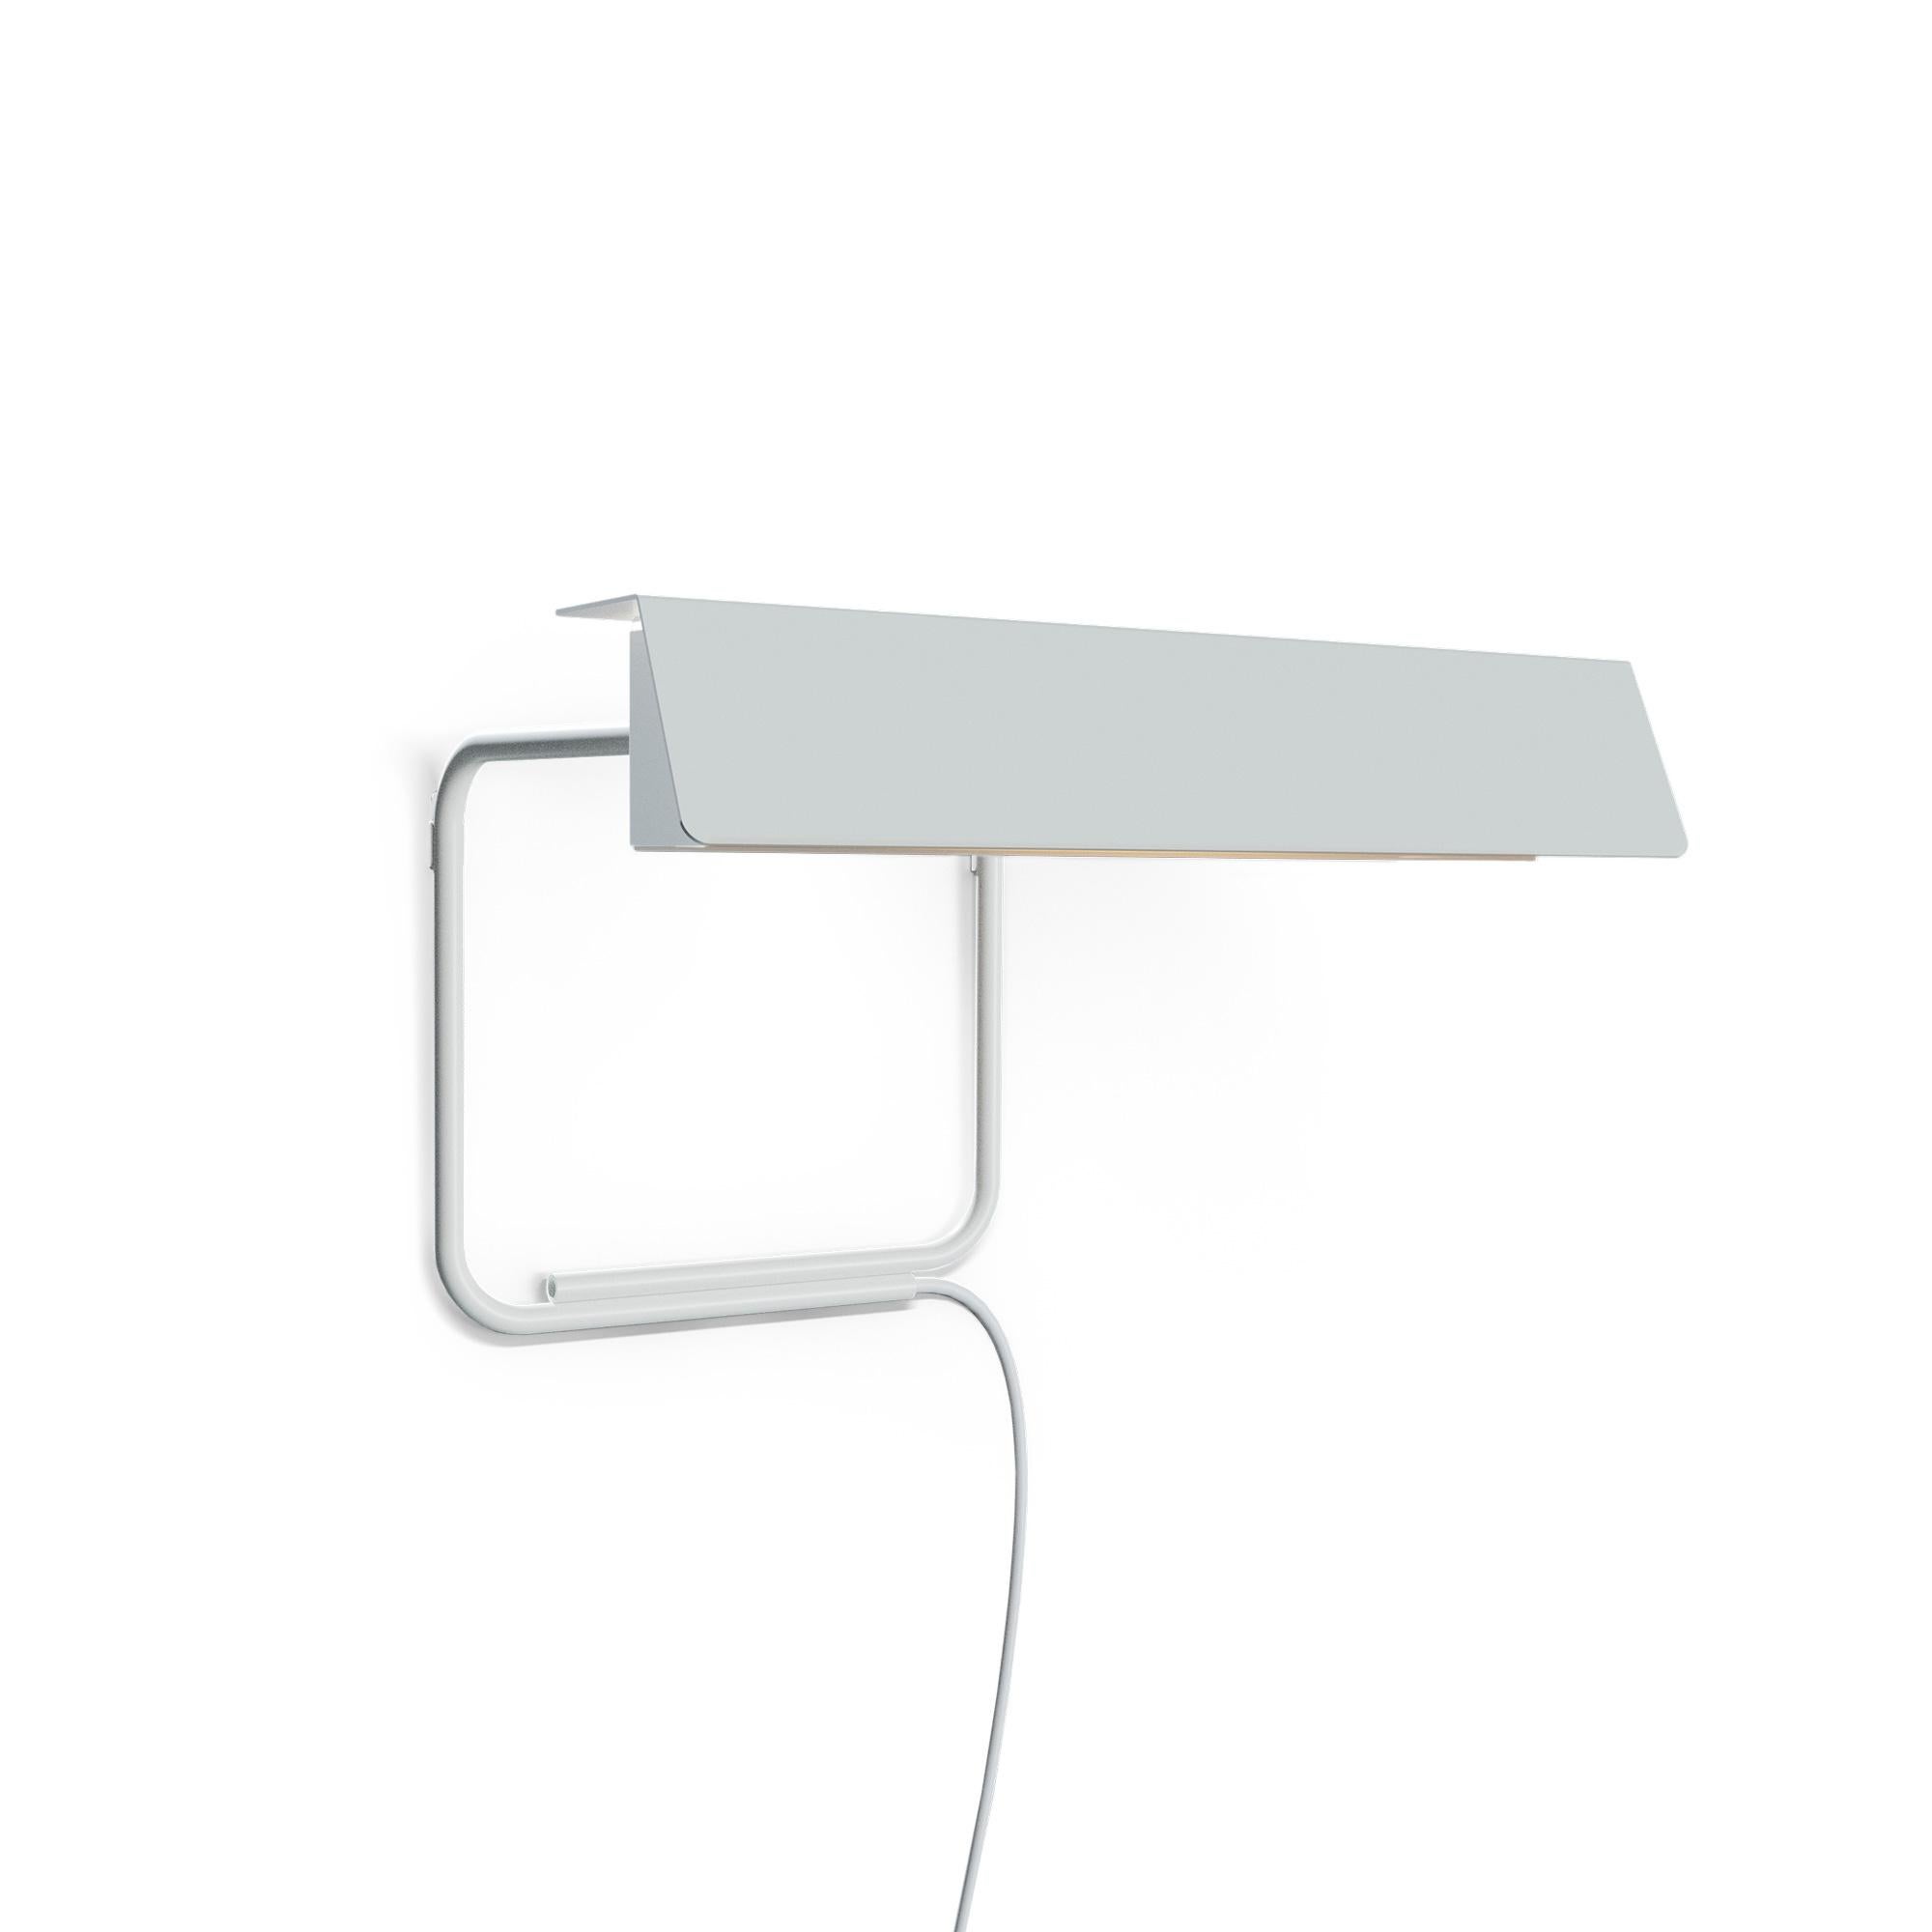 Alain Richard Wall Lamp 5980 in White for Disderot In New Condition For Sale In Glendale, CA